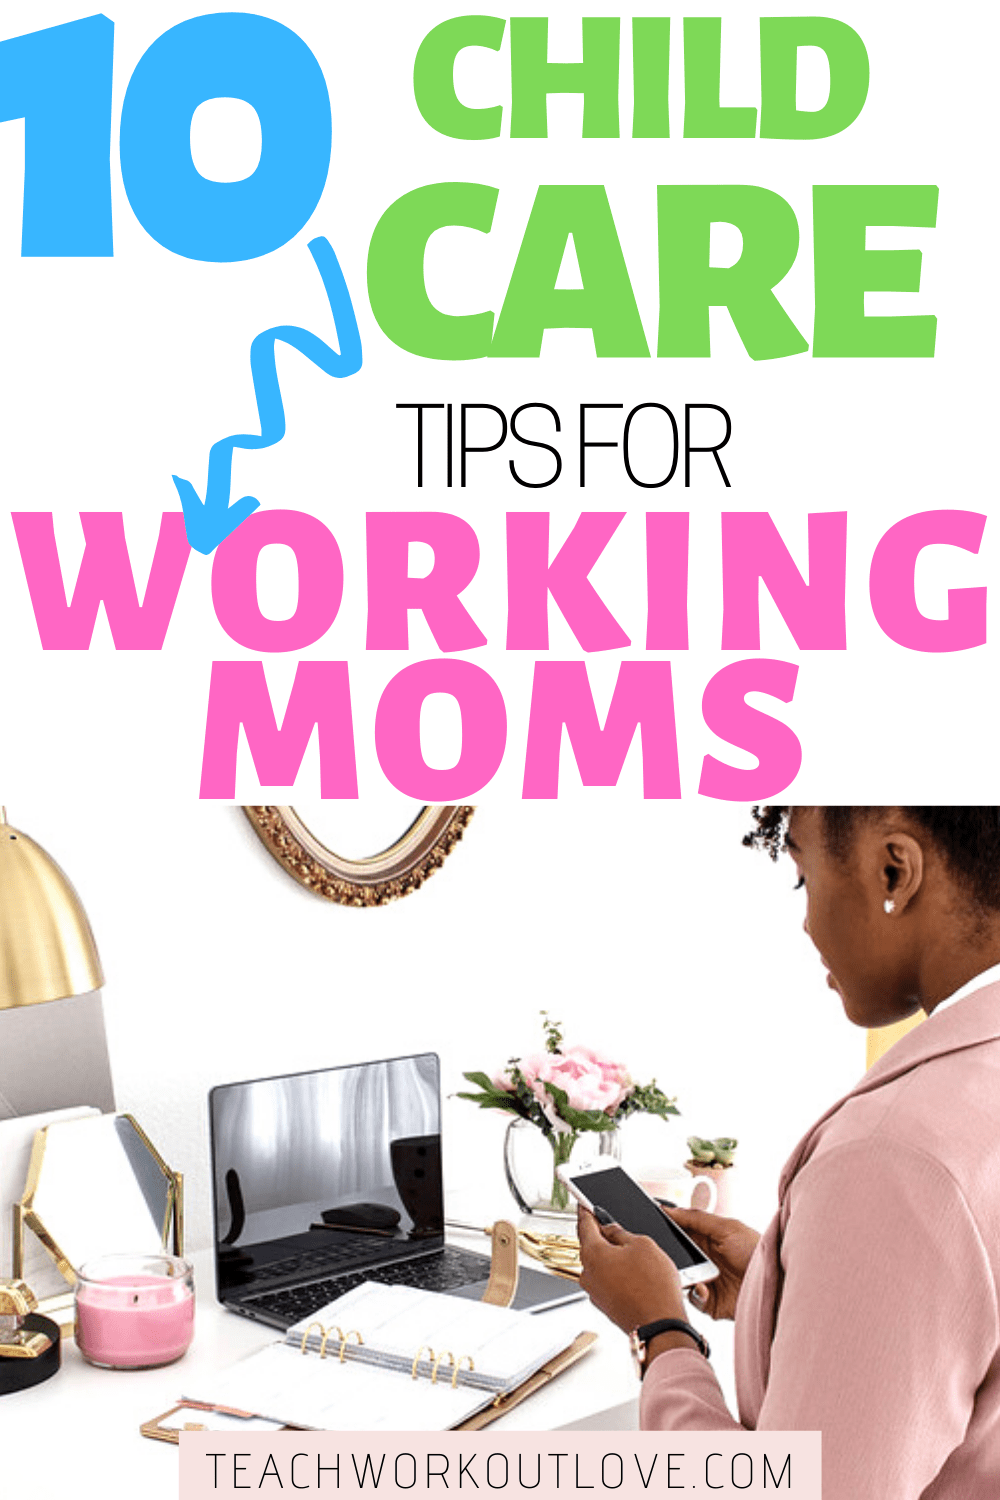 Are you a working mom who needs child care? Check out this 10 effective child care tips for working moms to balance your work and child care.